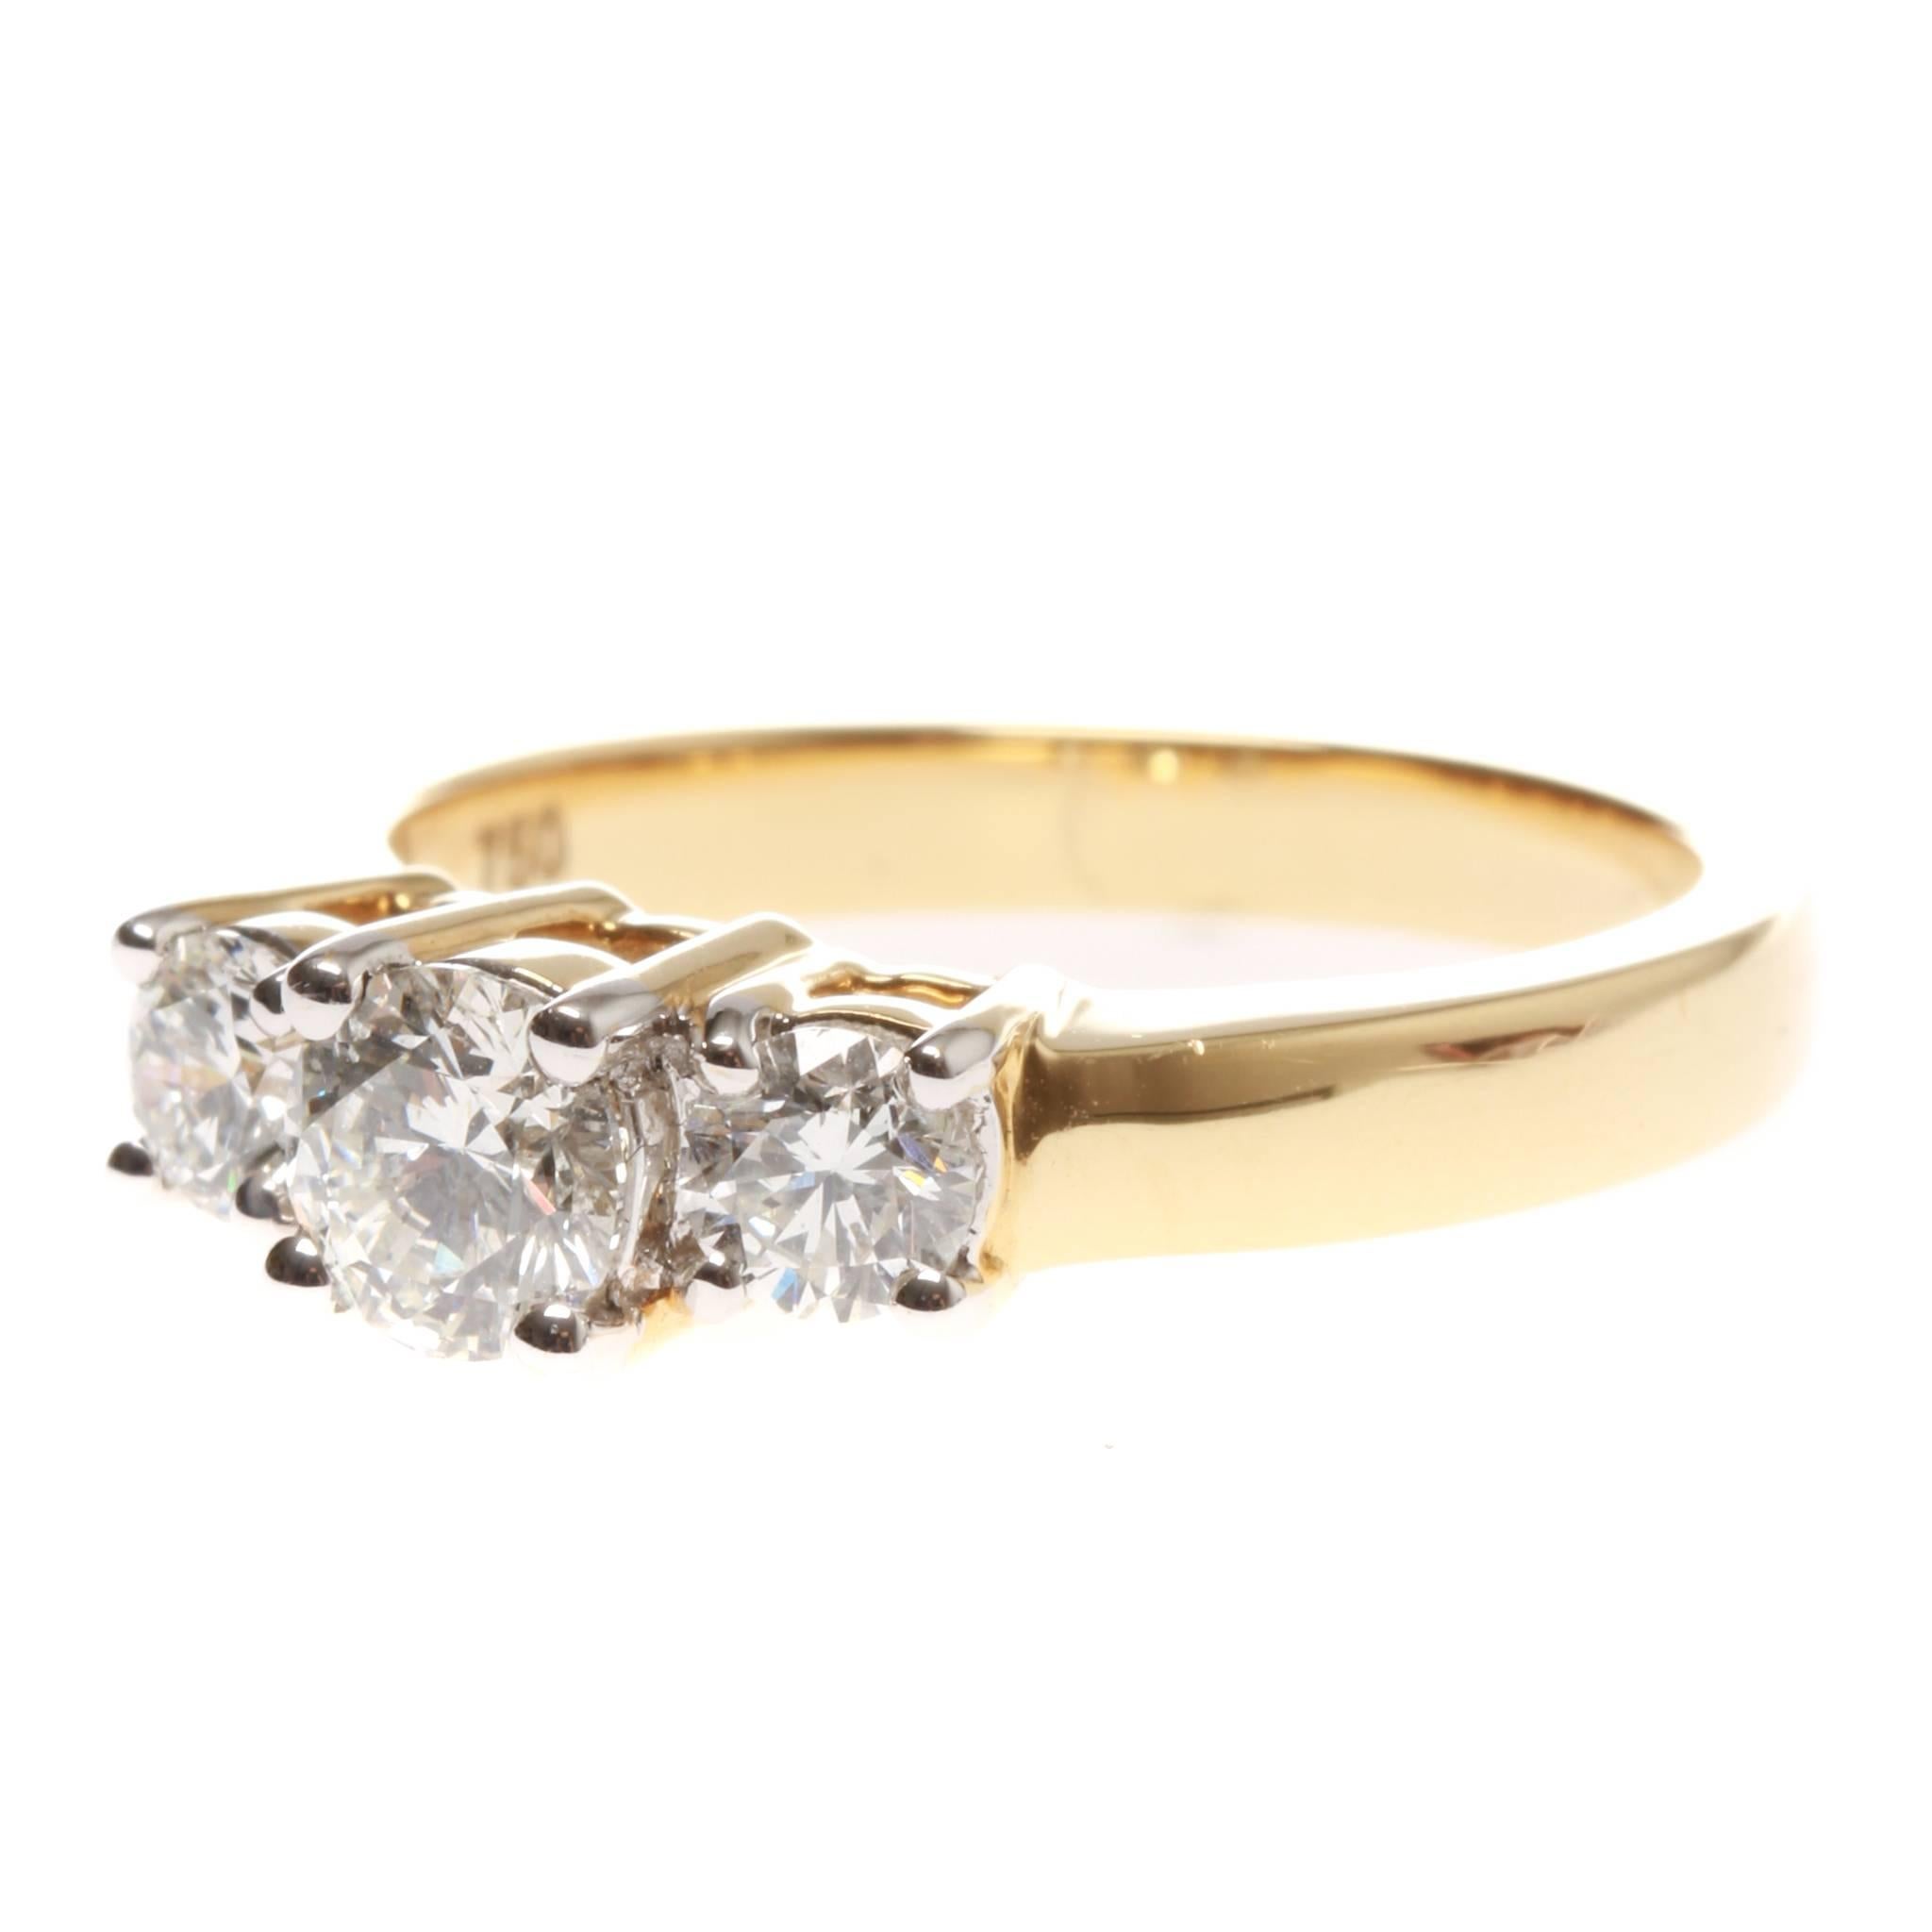 One Lady's, cast, 18ct yellow gold and rhodium plated three stone diamond ring.
Plain and wide, low half round, tapered band of 2.70mm in width (at base) x 1.52mm in depth.
Open setting backs with plain shoulders.
Feature stepped top having three, 4